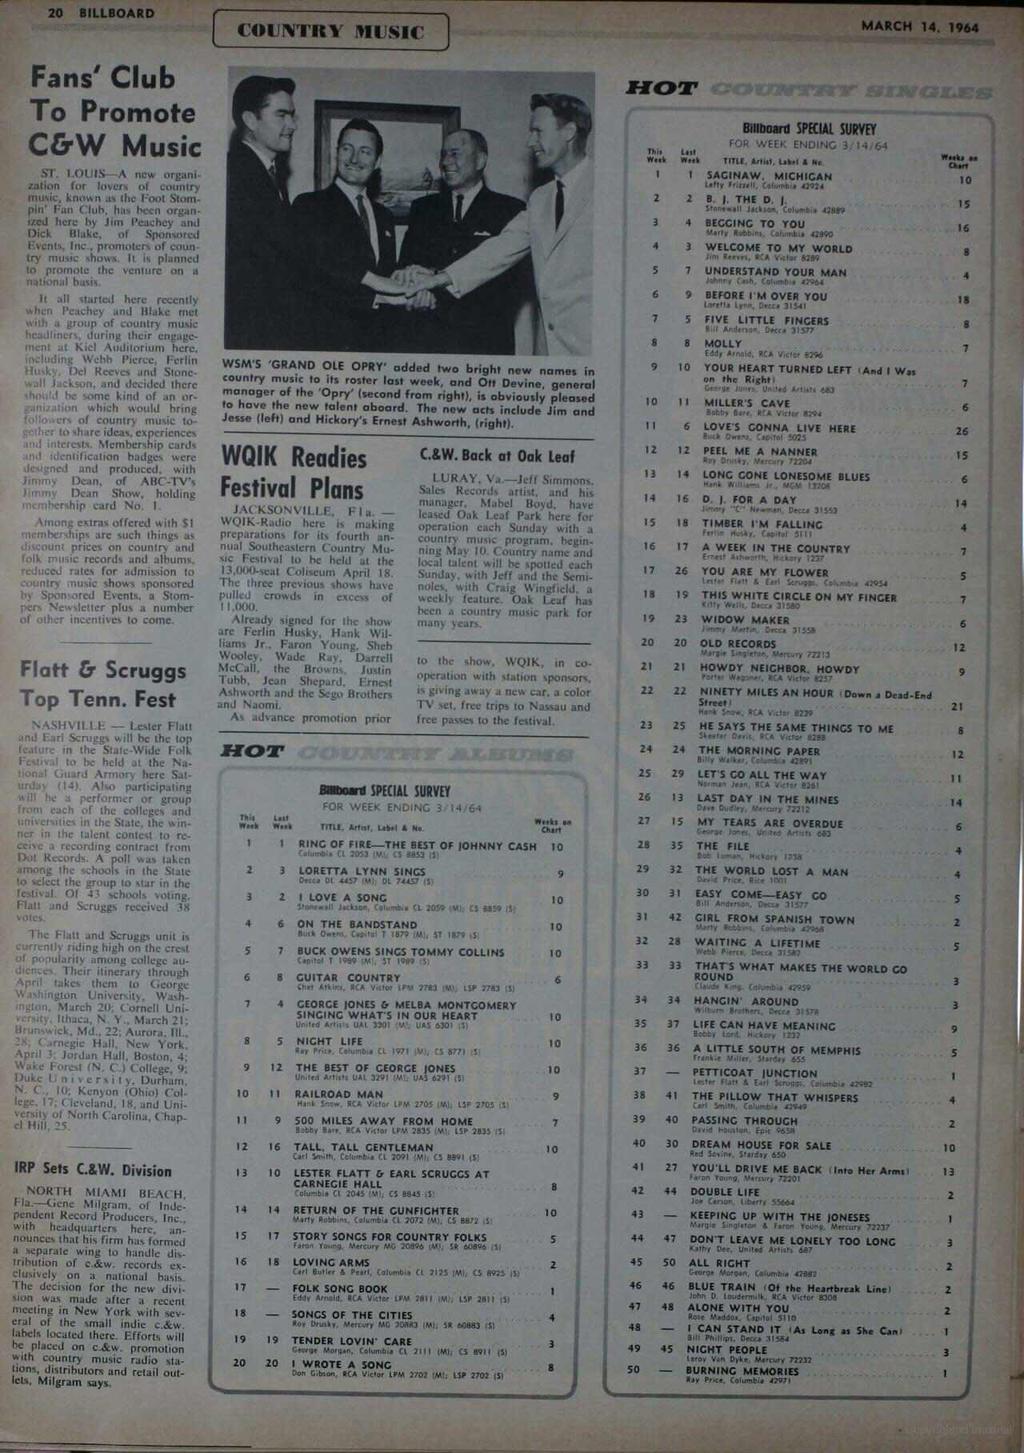 20 BILLBOARD COUNTRY 1RUSIC MARCH 14. 1964 Fans' Club To Promote C&W Music ST.